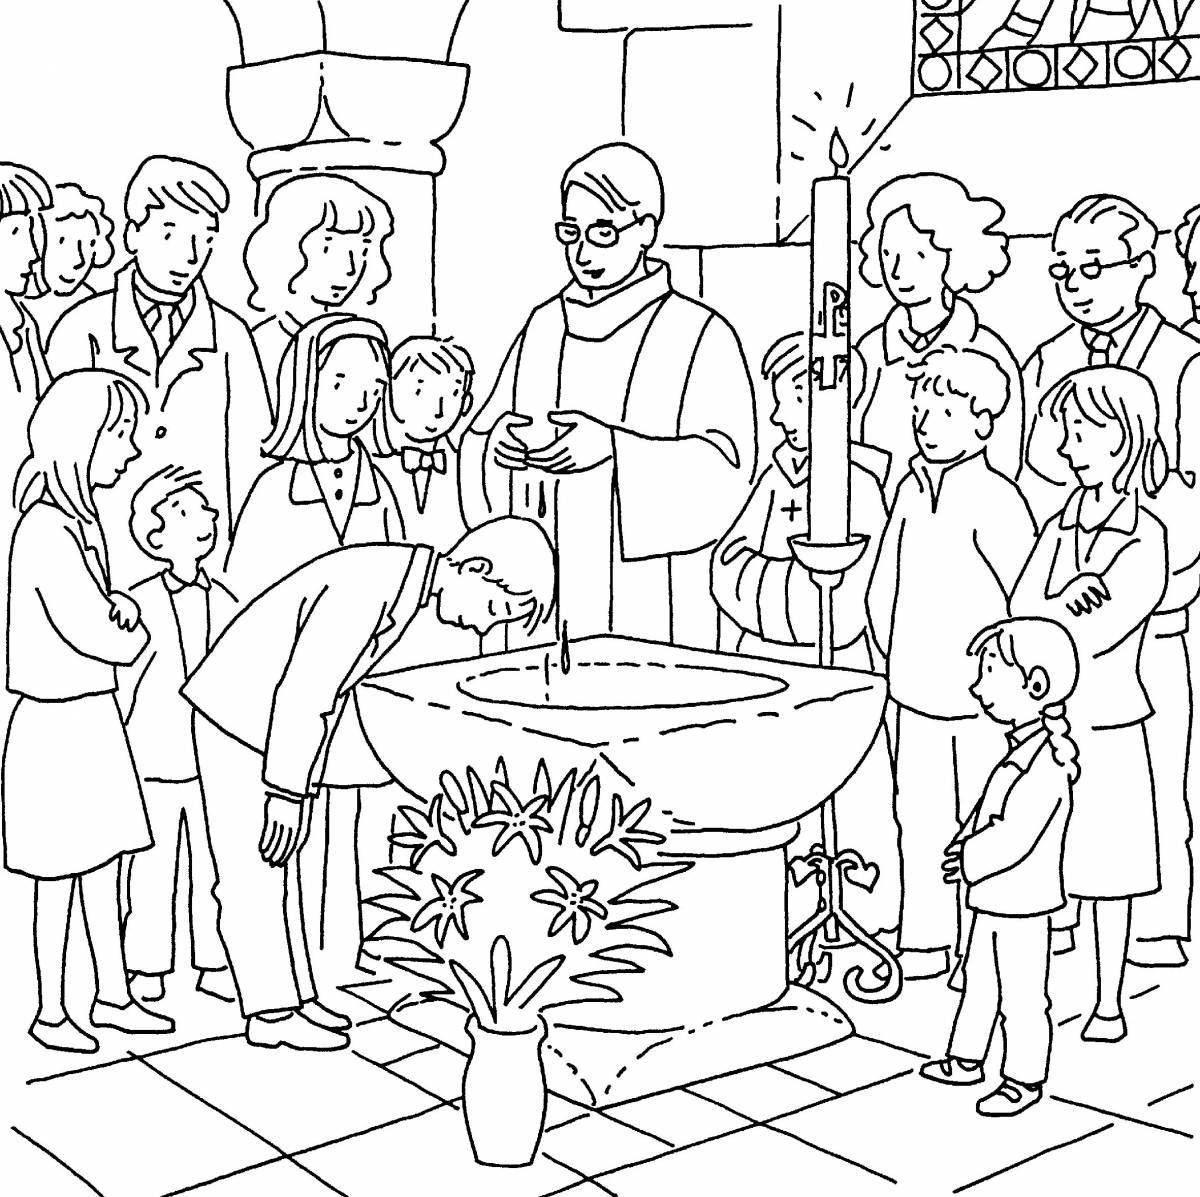 Bright christening coloring page